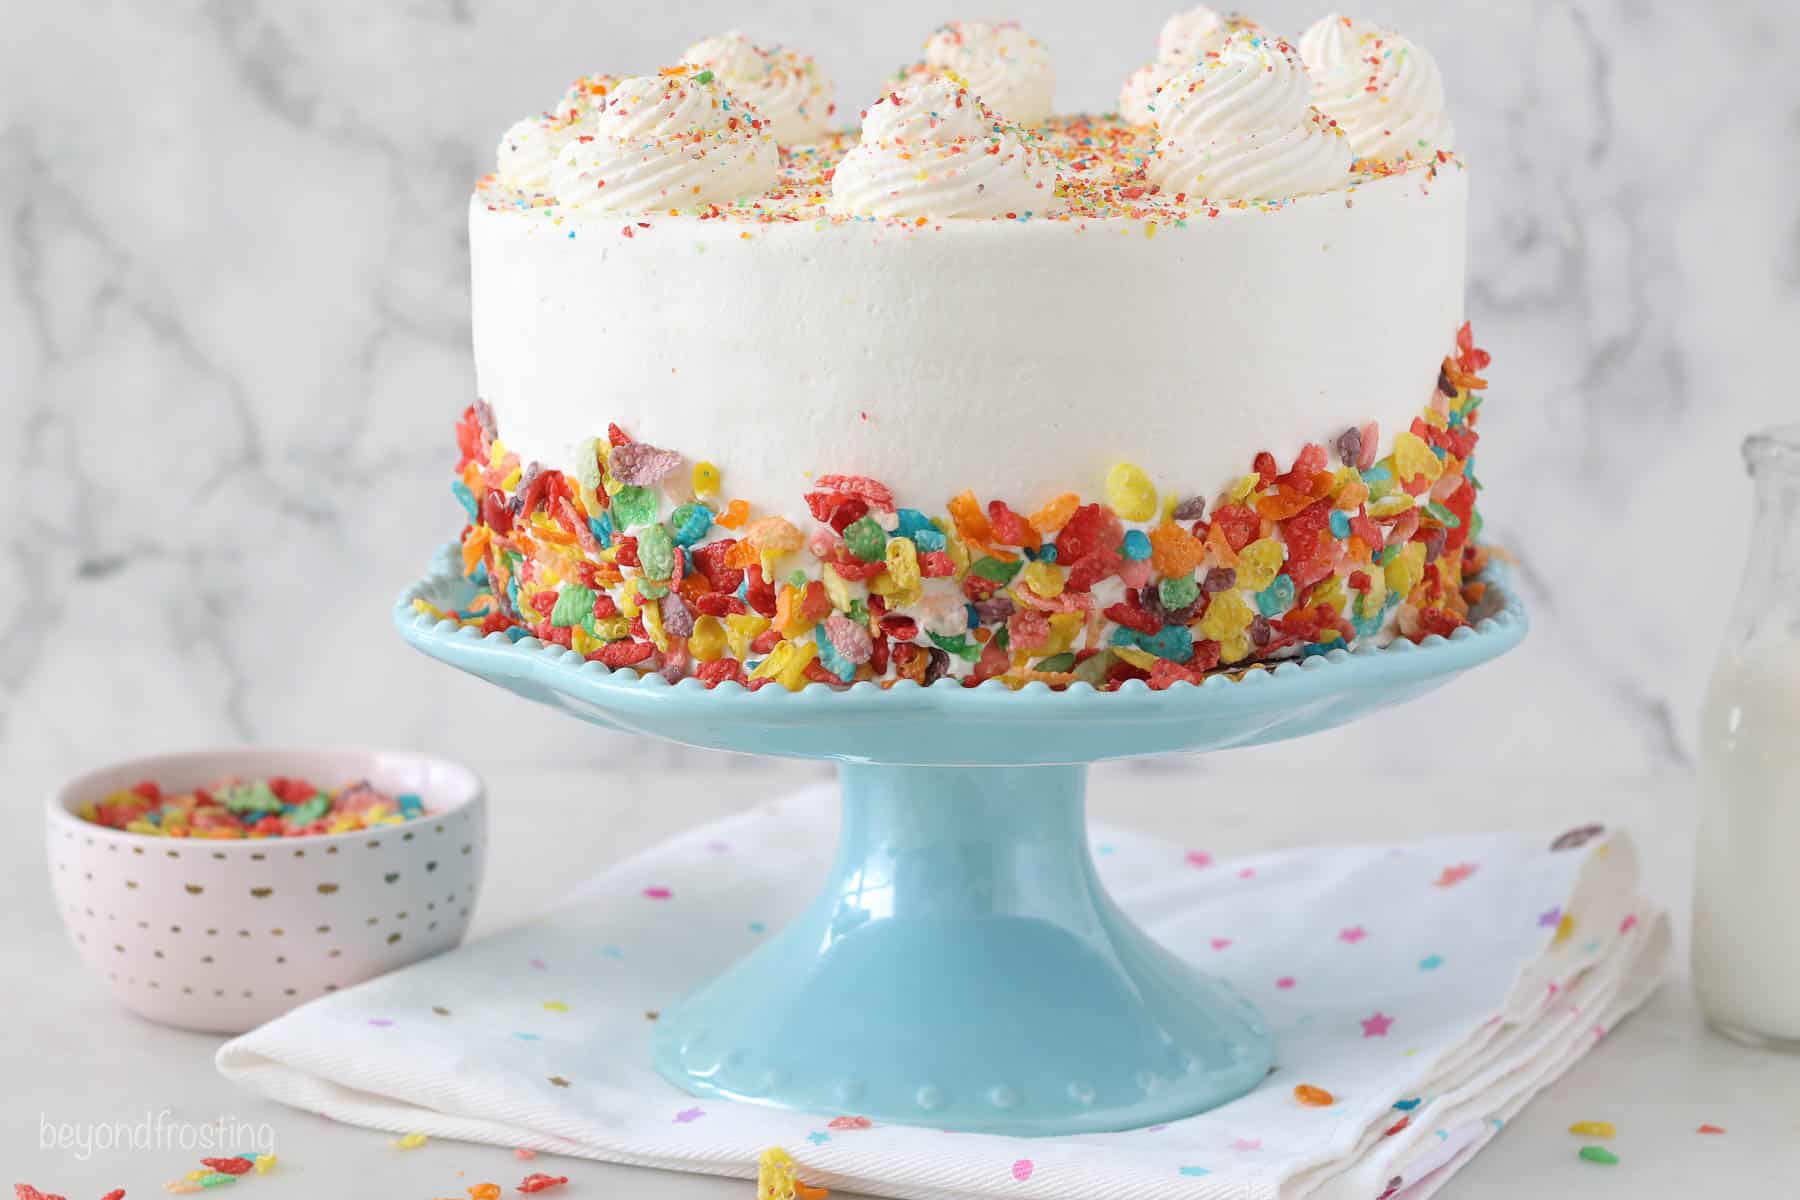 Angled view of a fruity pebble ice cream cake